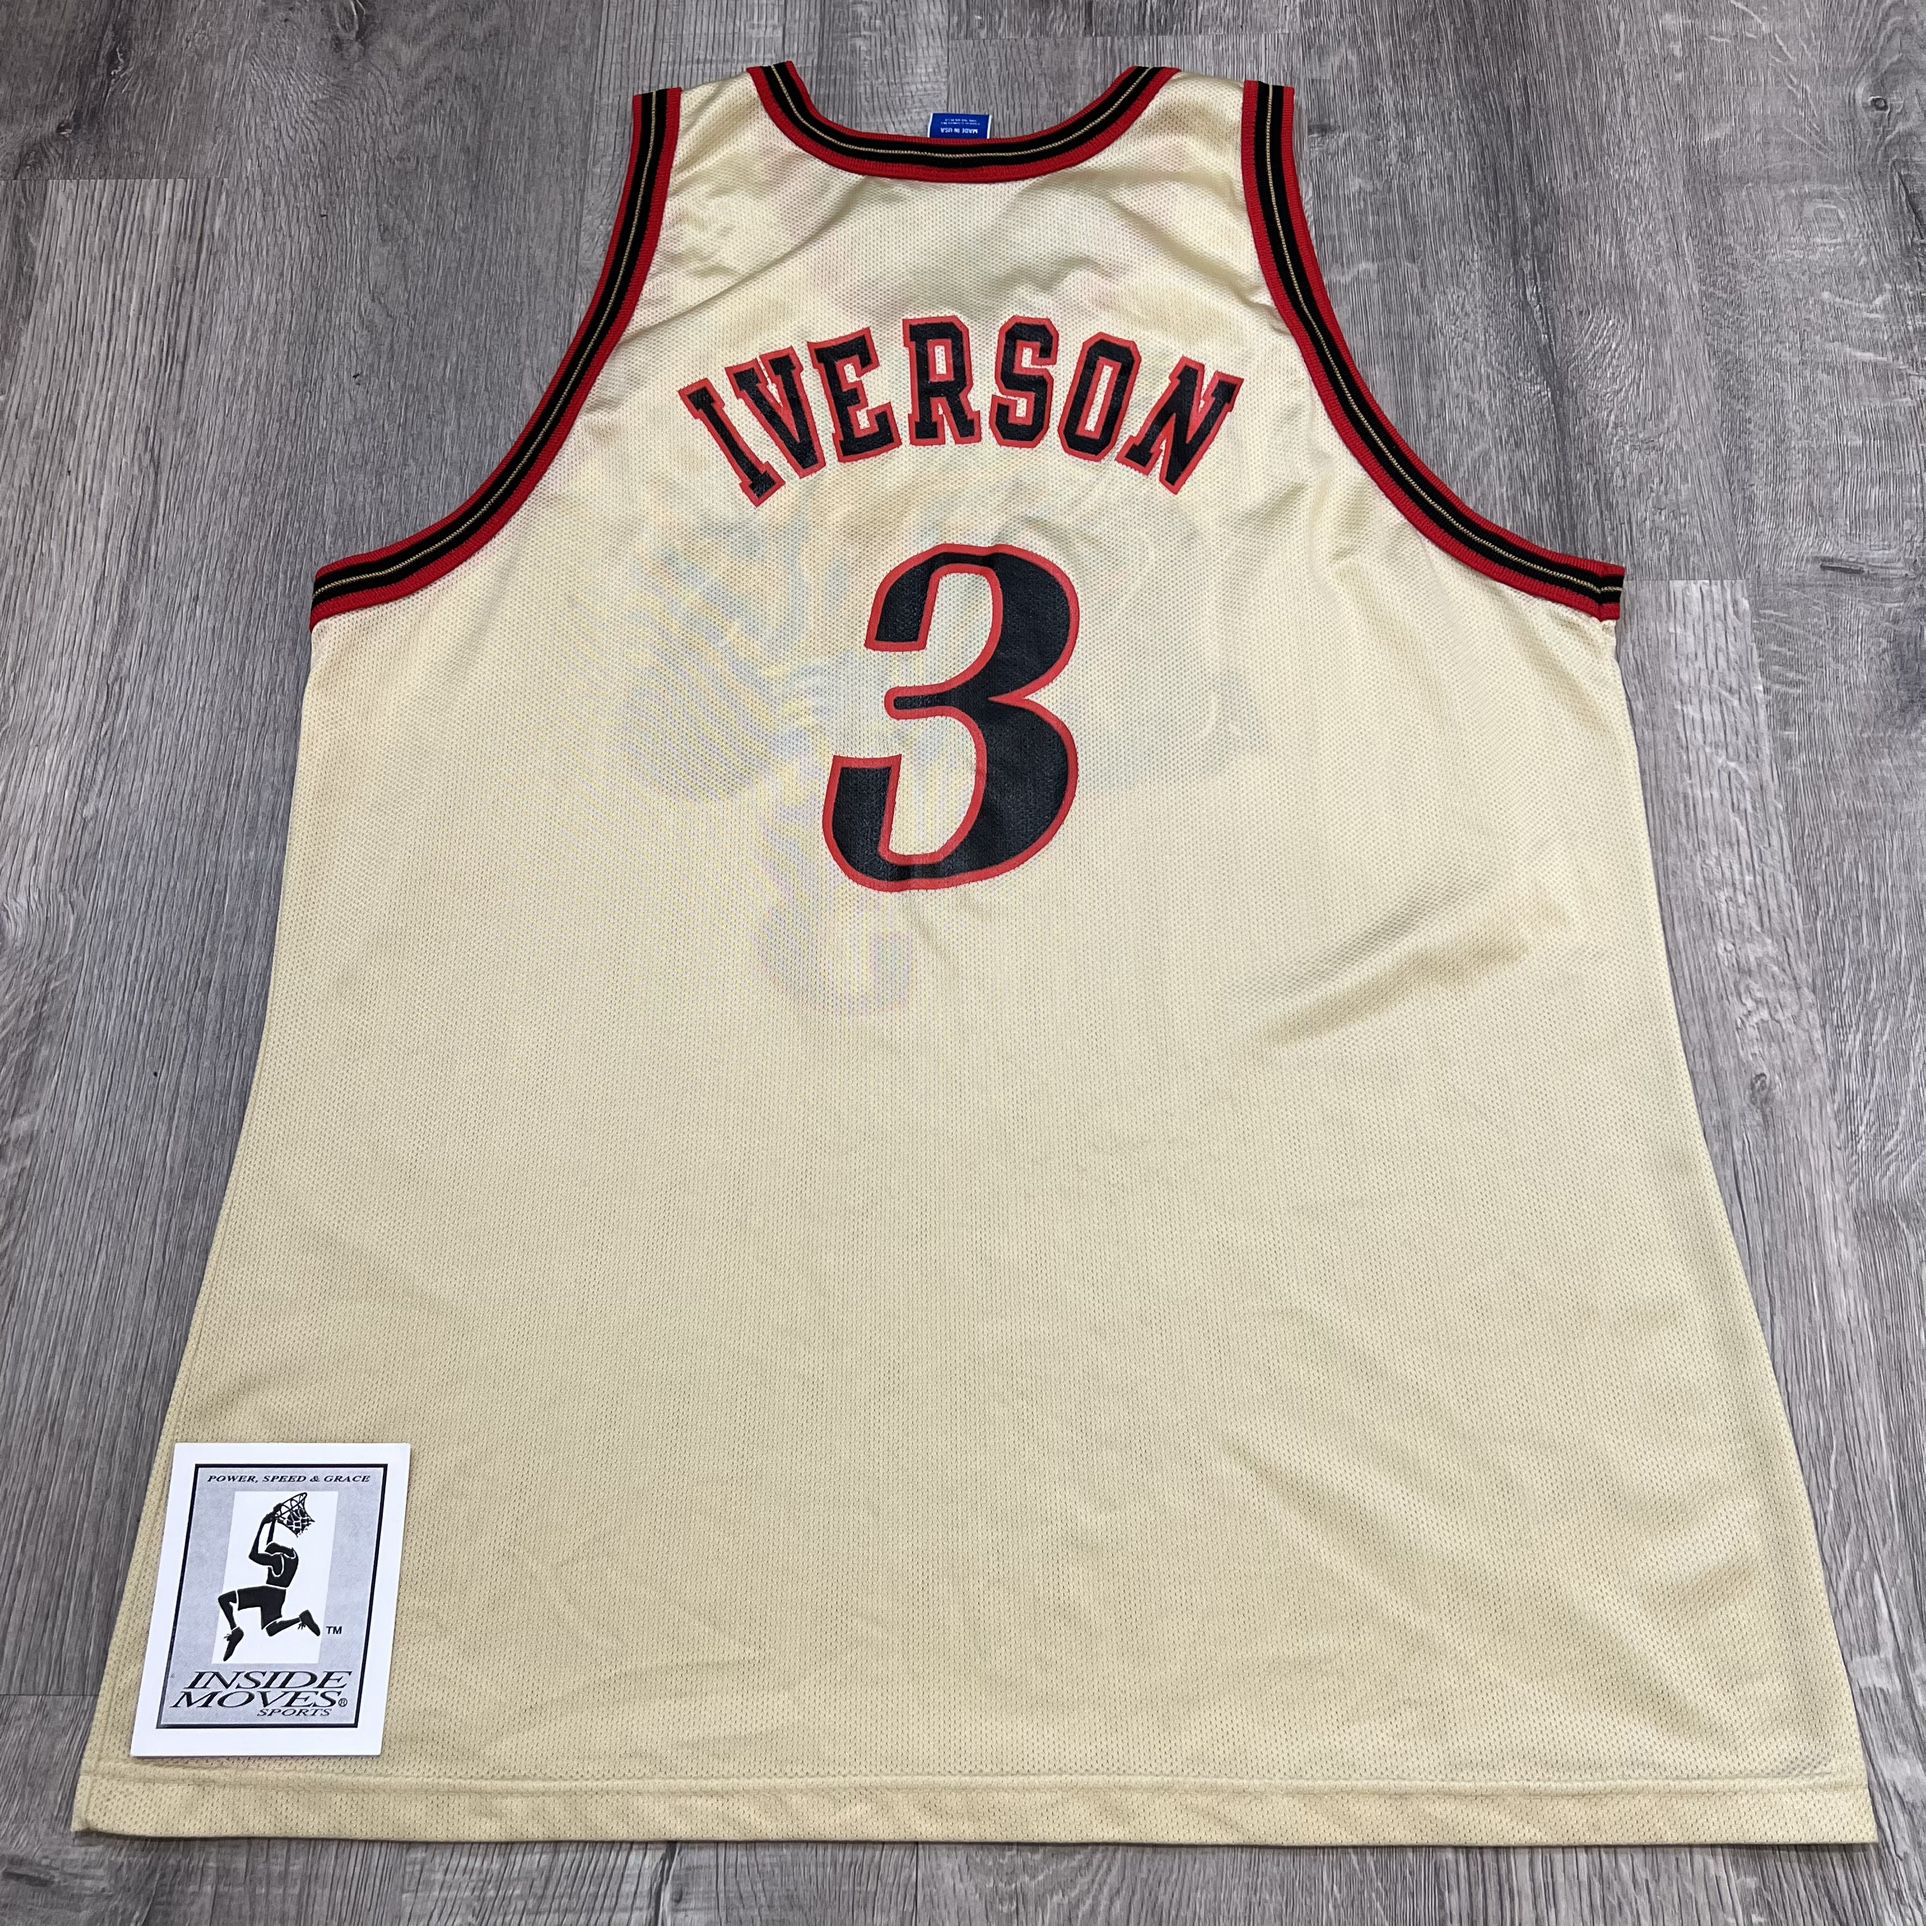 Vintage NBA 50th Anniversary Champion Jerseys - MJ 48, Iverson 48, Kobe  Sold for Sale in Pasadena, CA - OfferUp